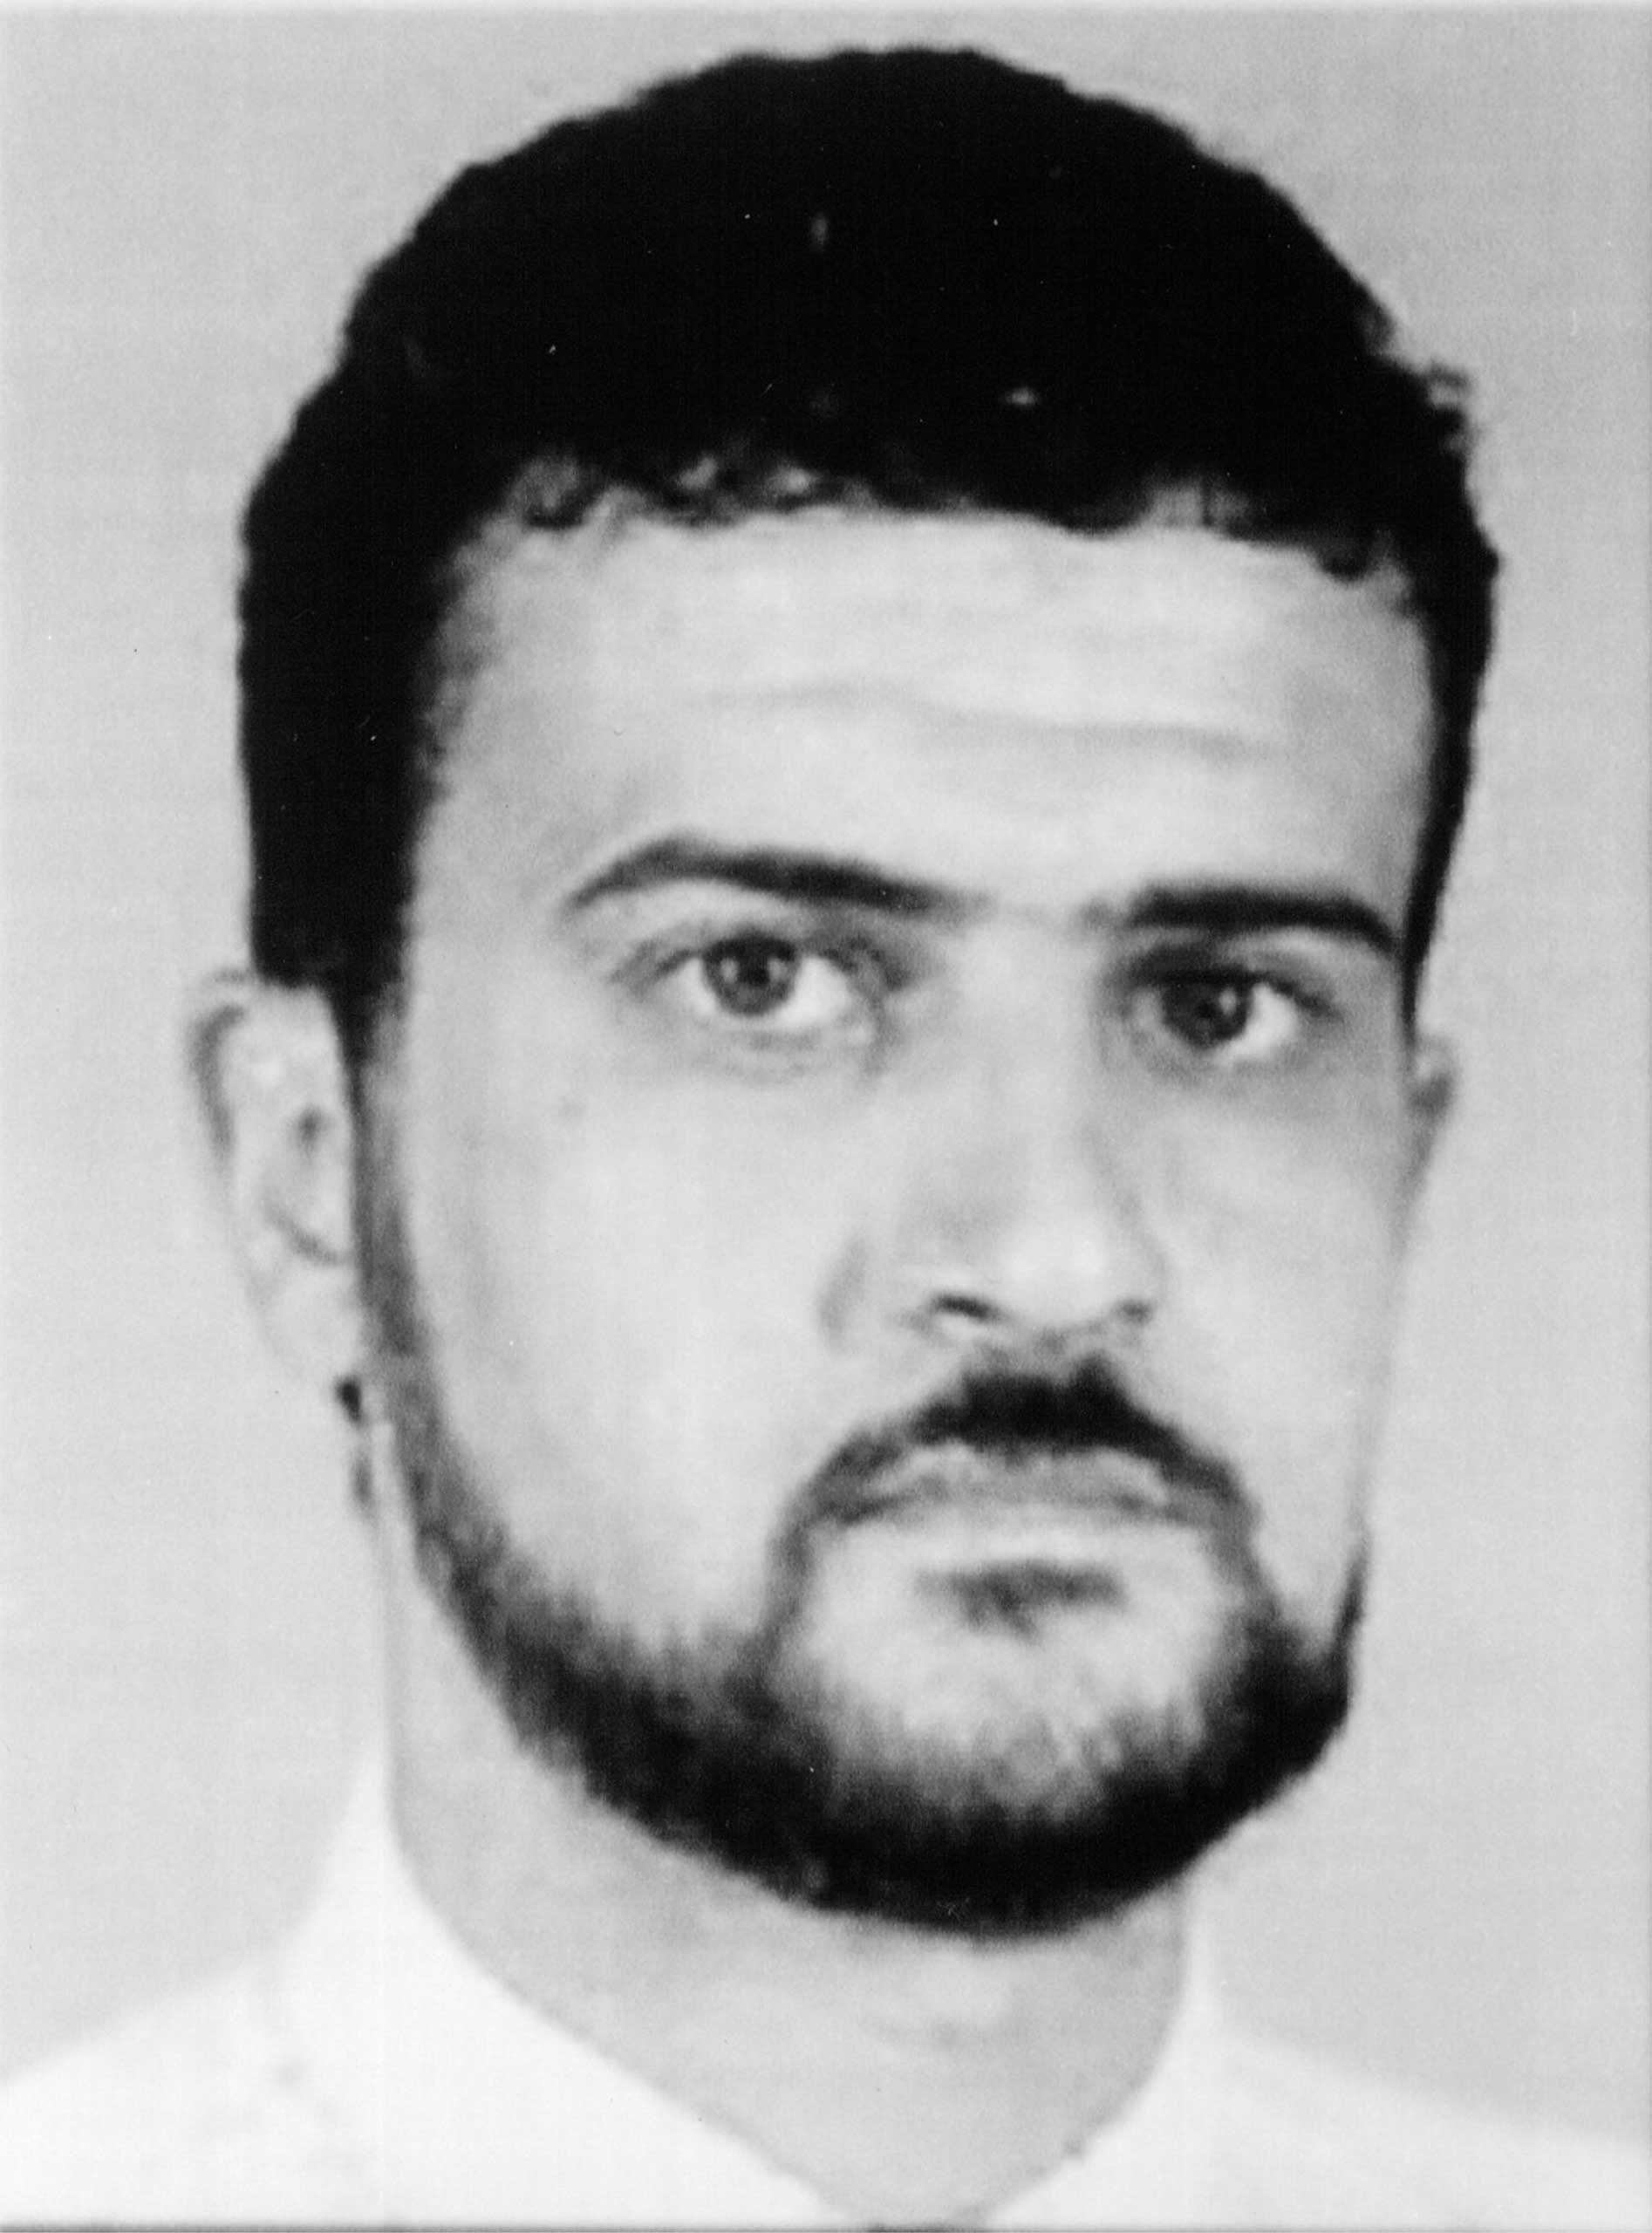 Anas Al-Liby is shown in this photo released by the FBI on Oct. 10, 2001 in Washington, D.C. (FBI/Getty Images)